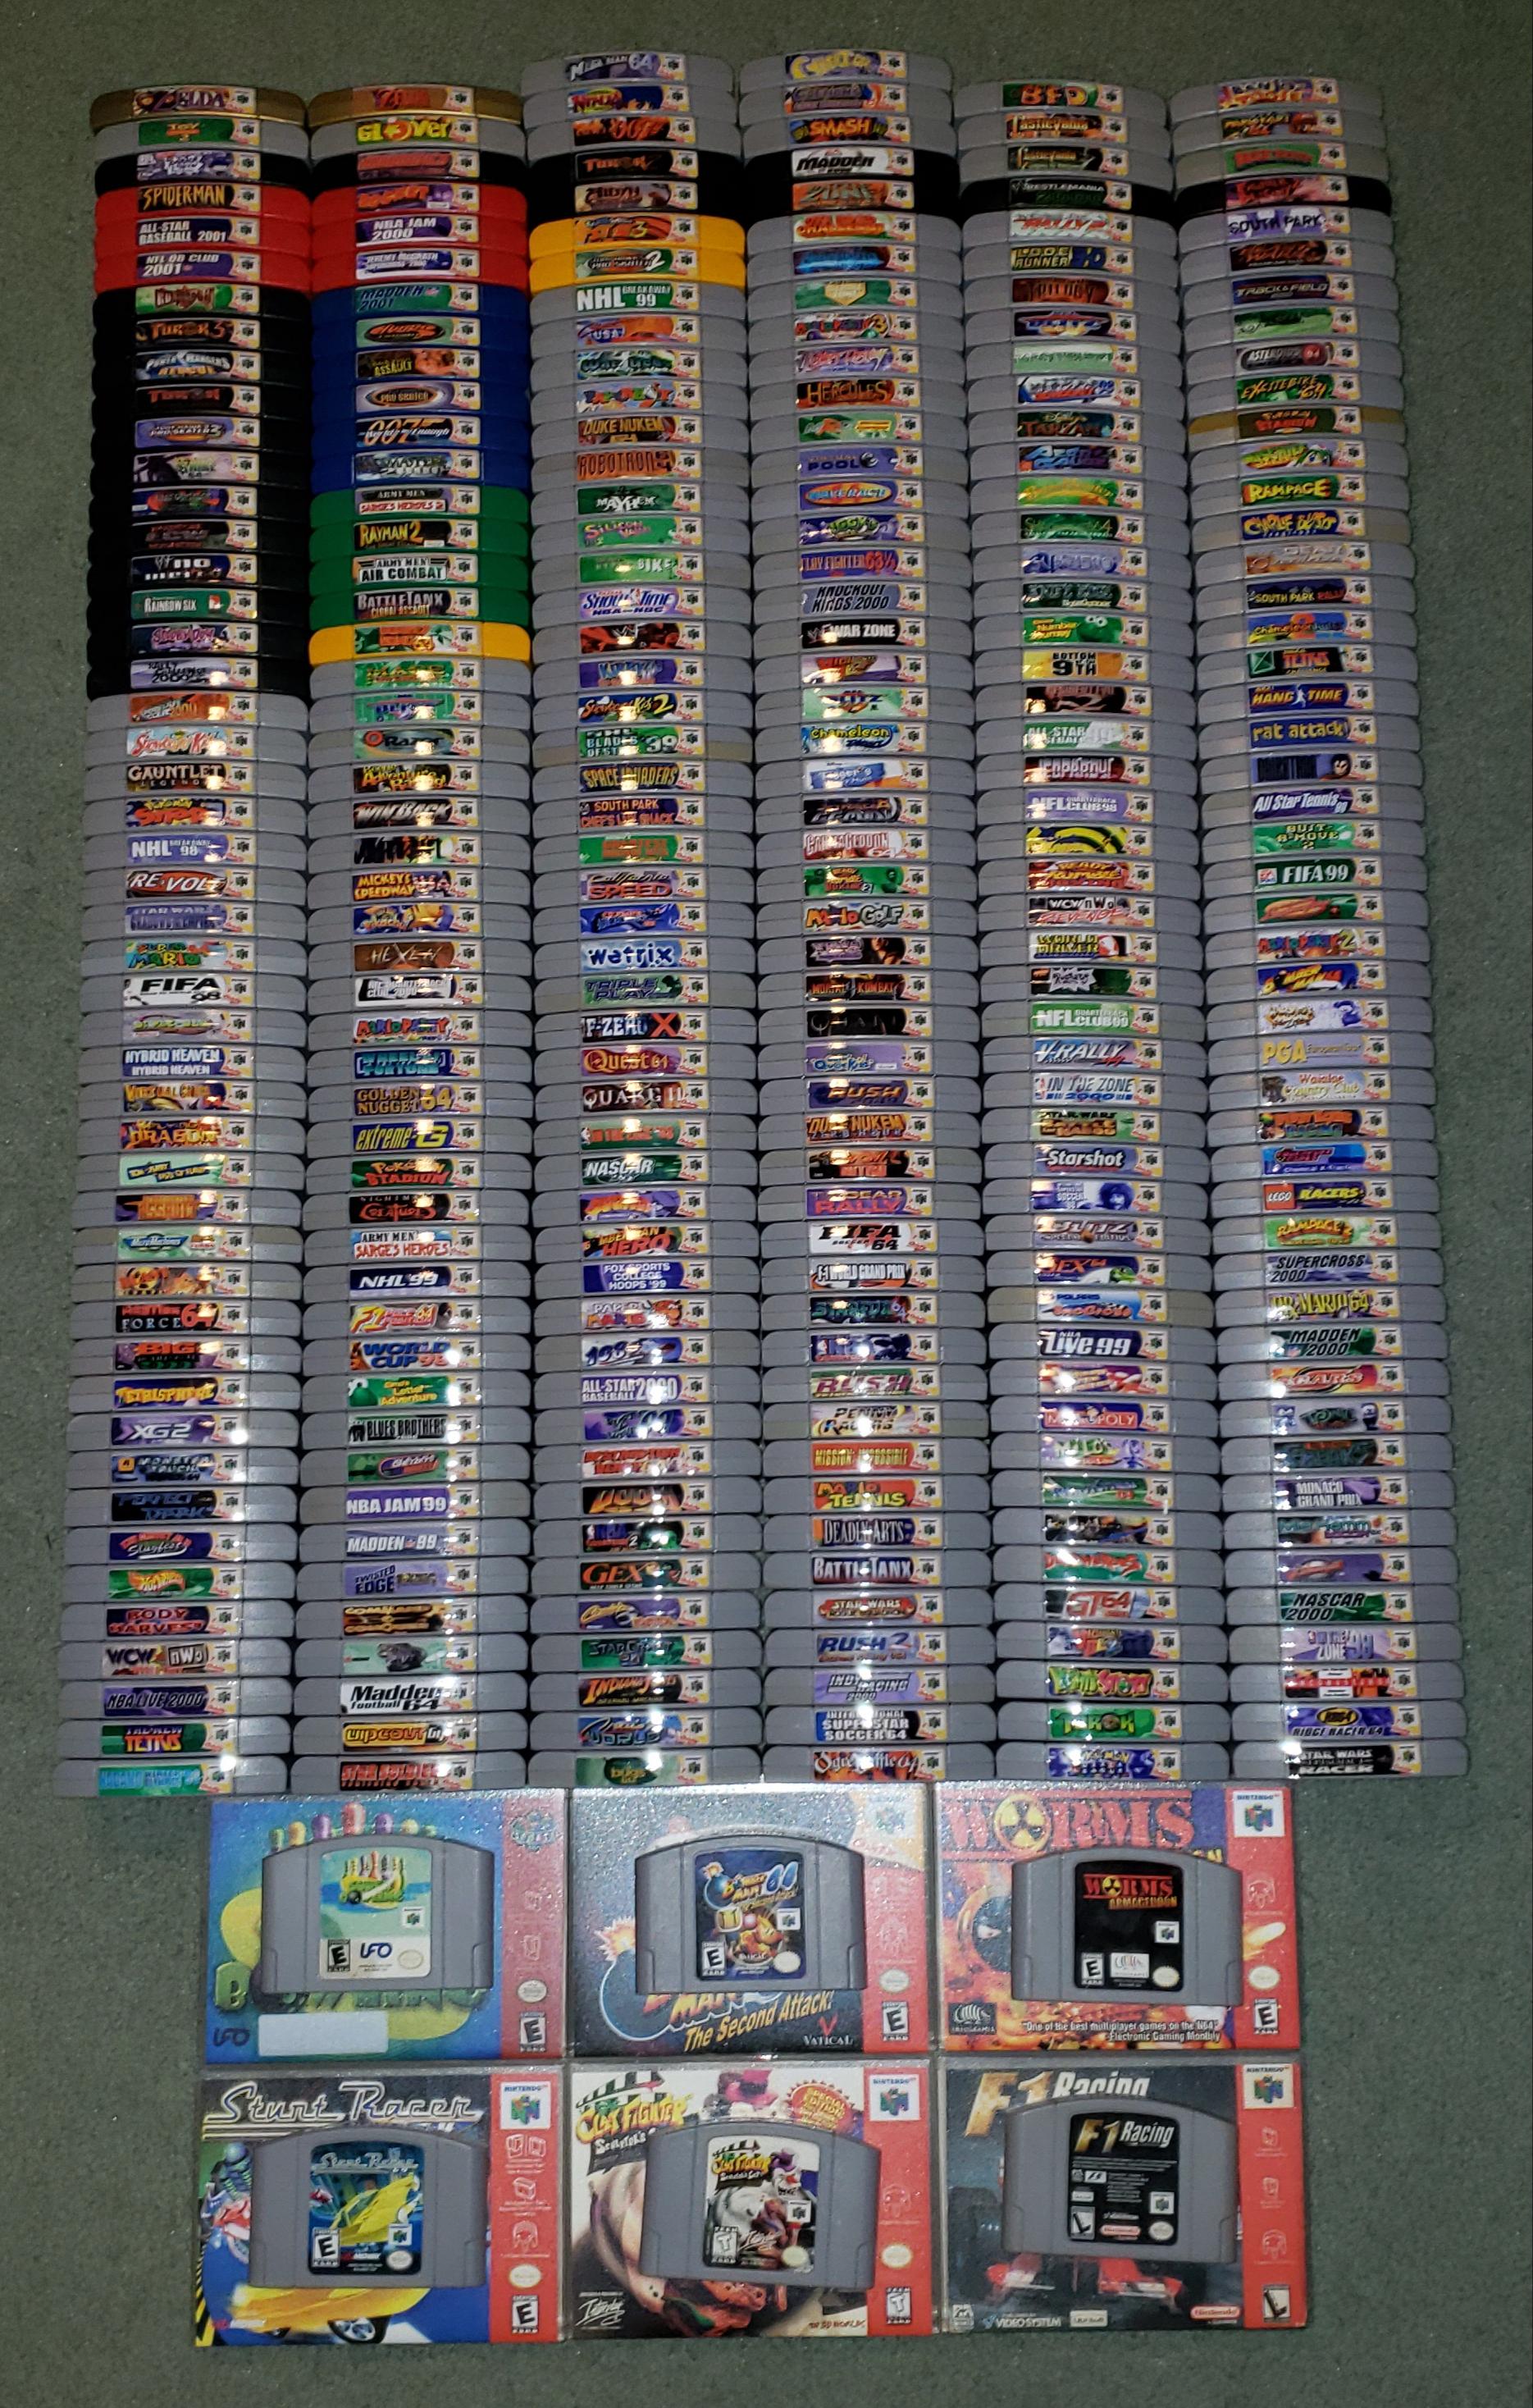 It looks like a complete American Library of Nintendo 64 Games |  GBAtemp.net - The Independent Video Game Community